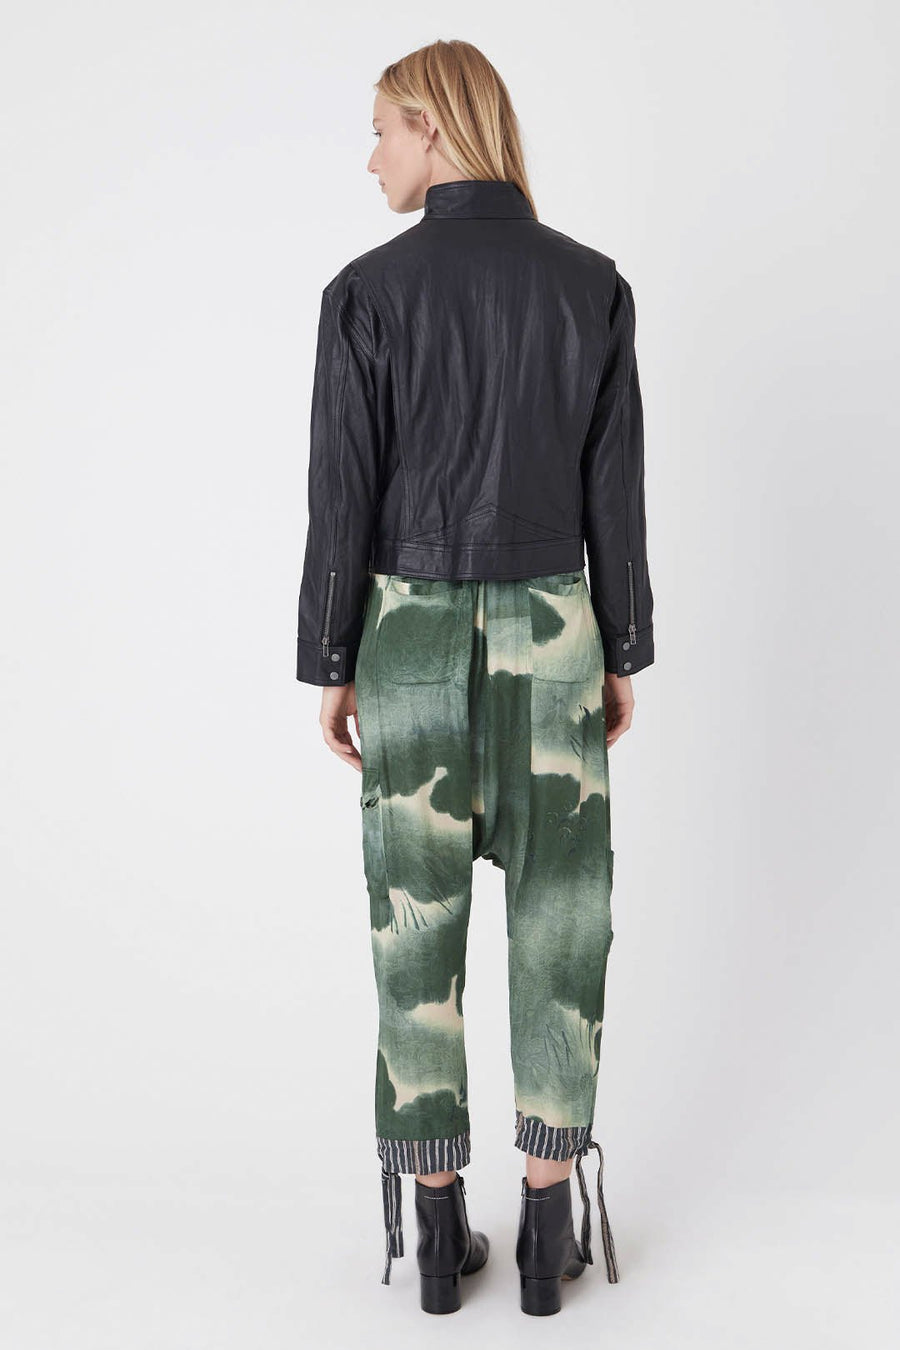 UBUD DROP CROTCH PANT, ARMY - Burning Torch Online Boutique